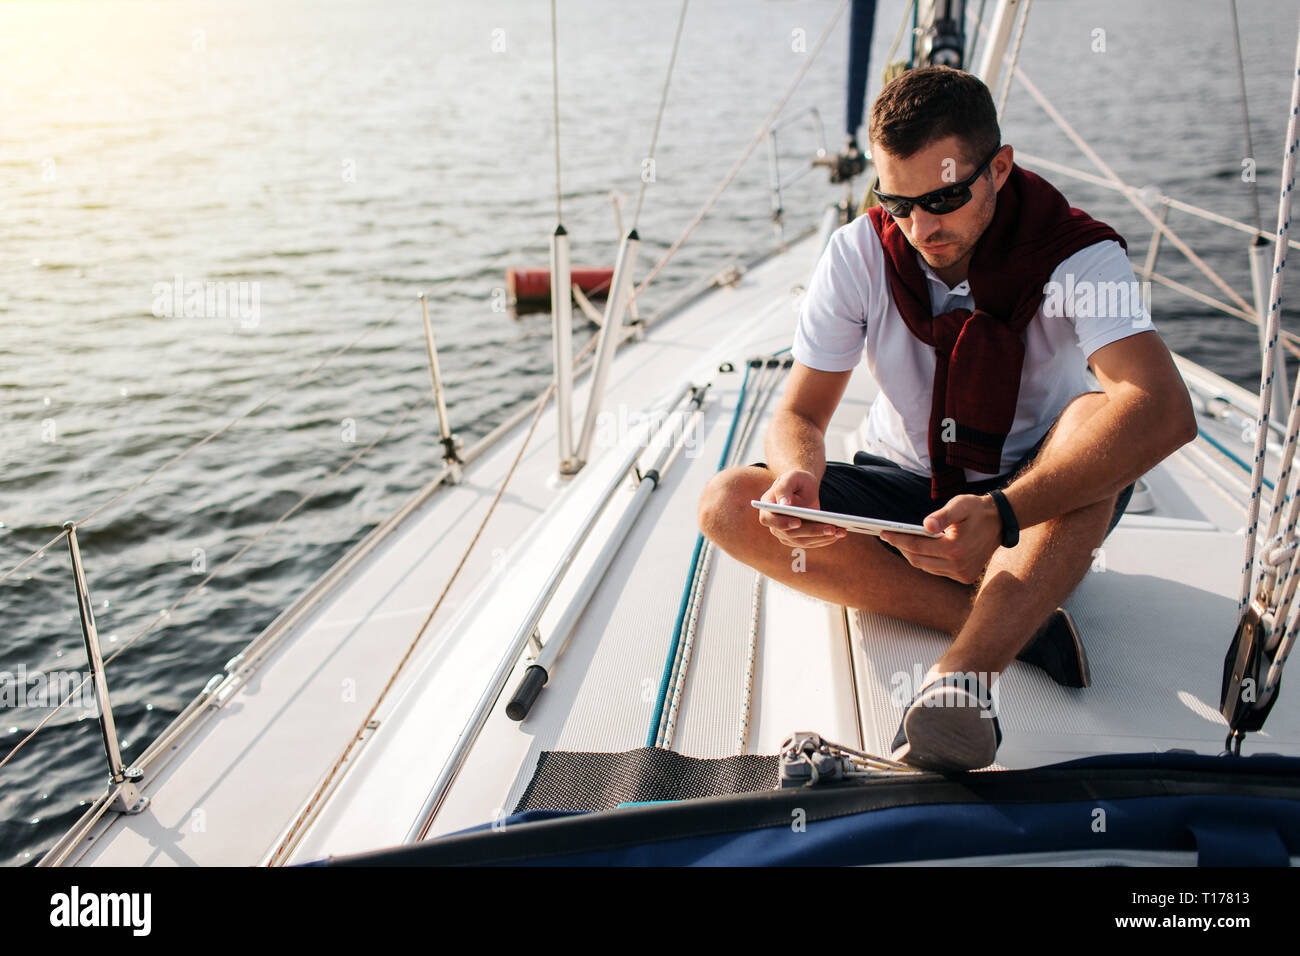 Serious and peaceful guy sits on board of yacht. He holds and looks at tablet. Young man is calm. He wears white sirt and dark sweater with shorts. Stock Photo